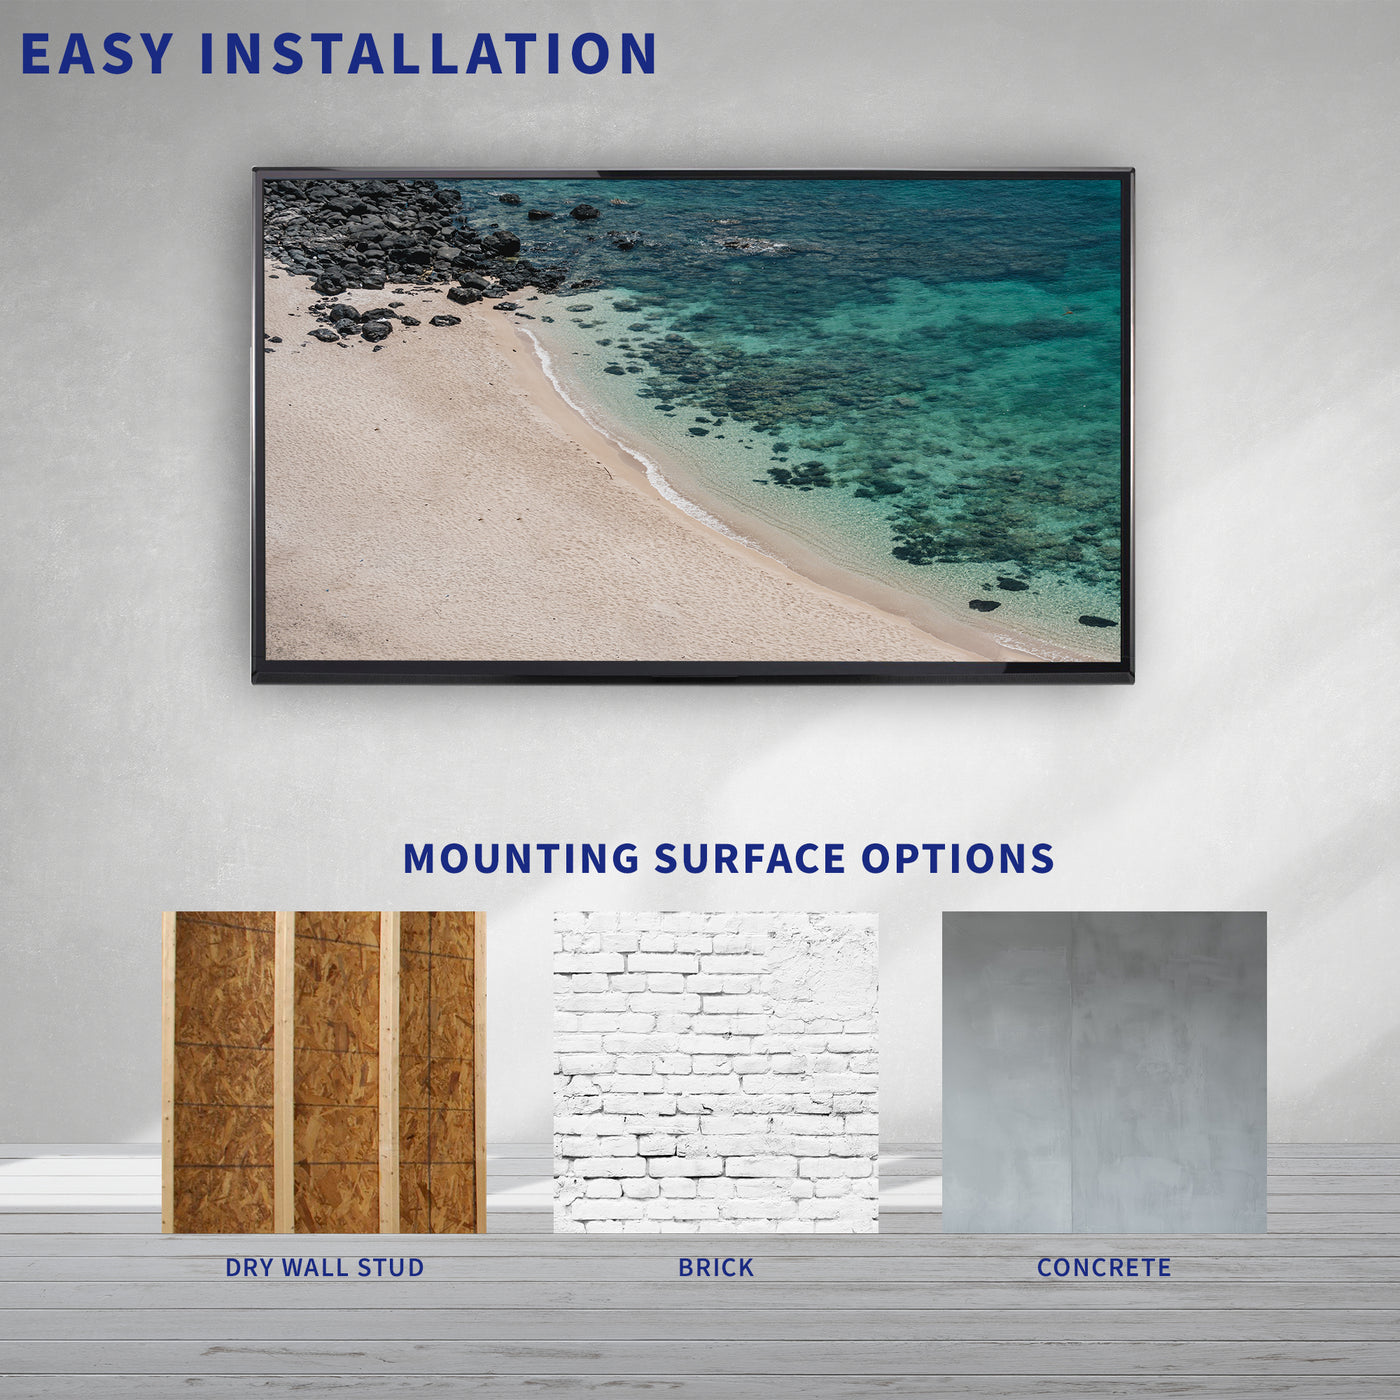 Easy installation to a variety of wall surfaces.